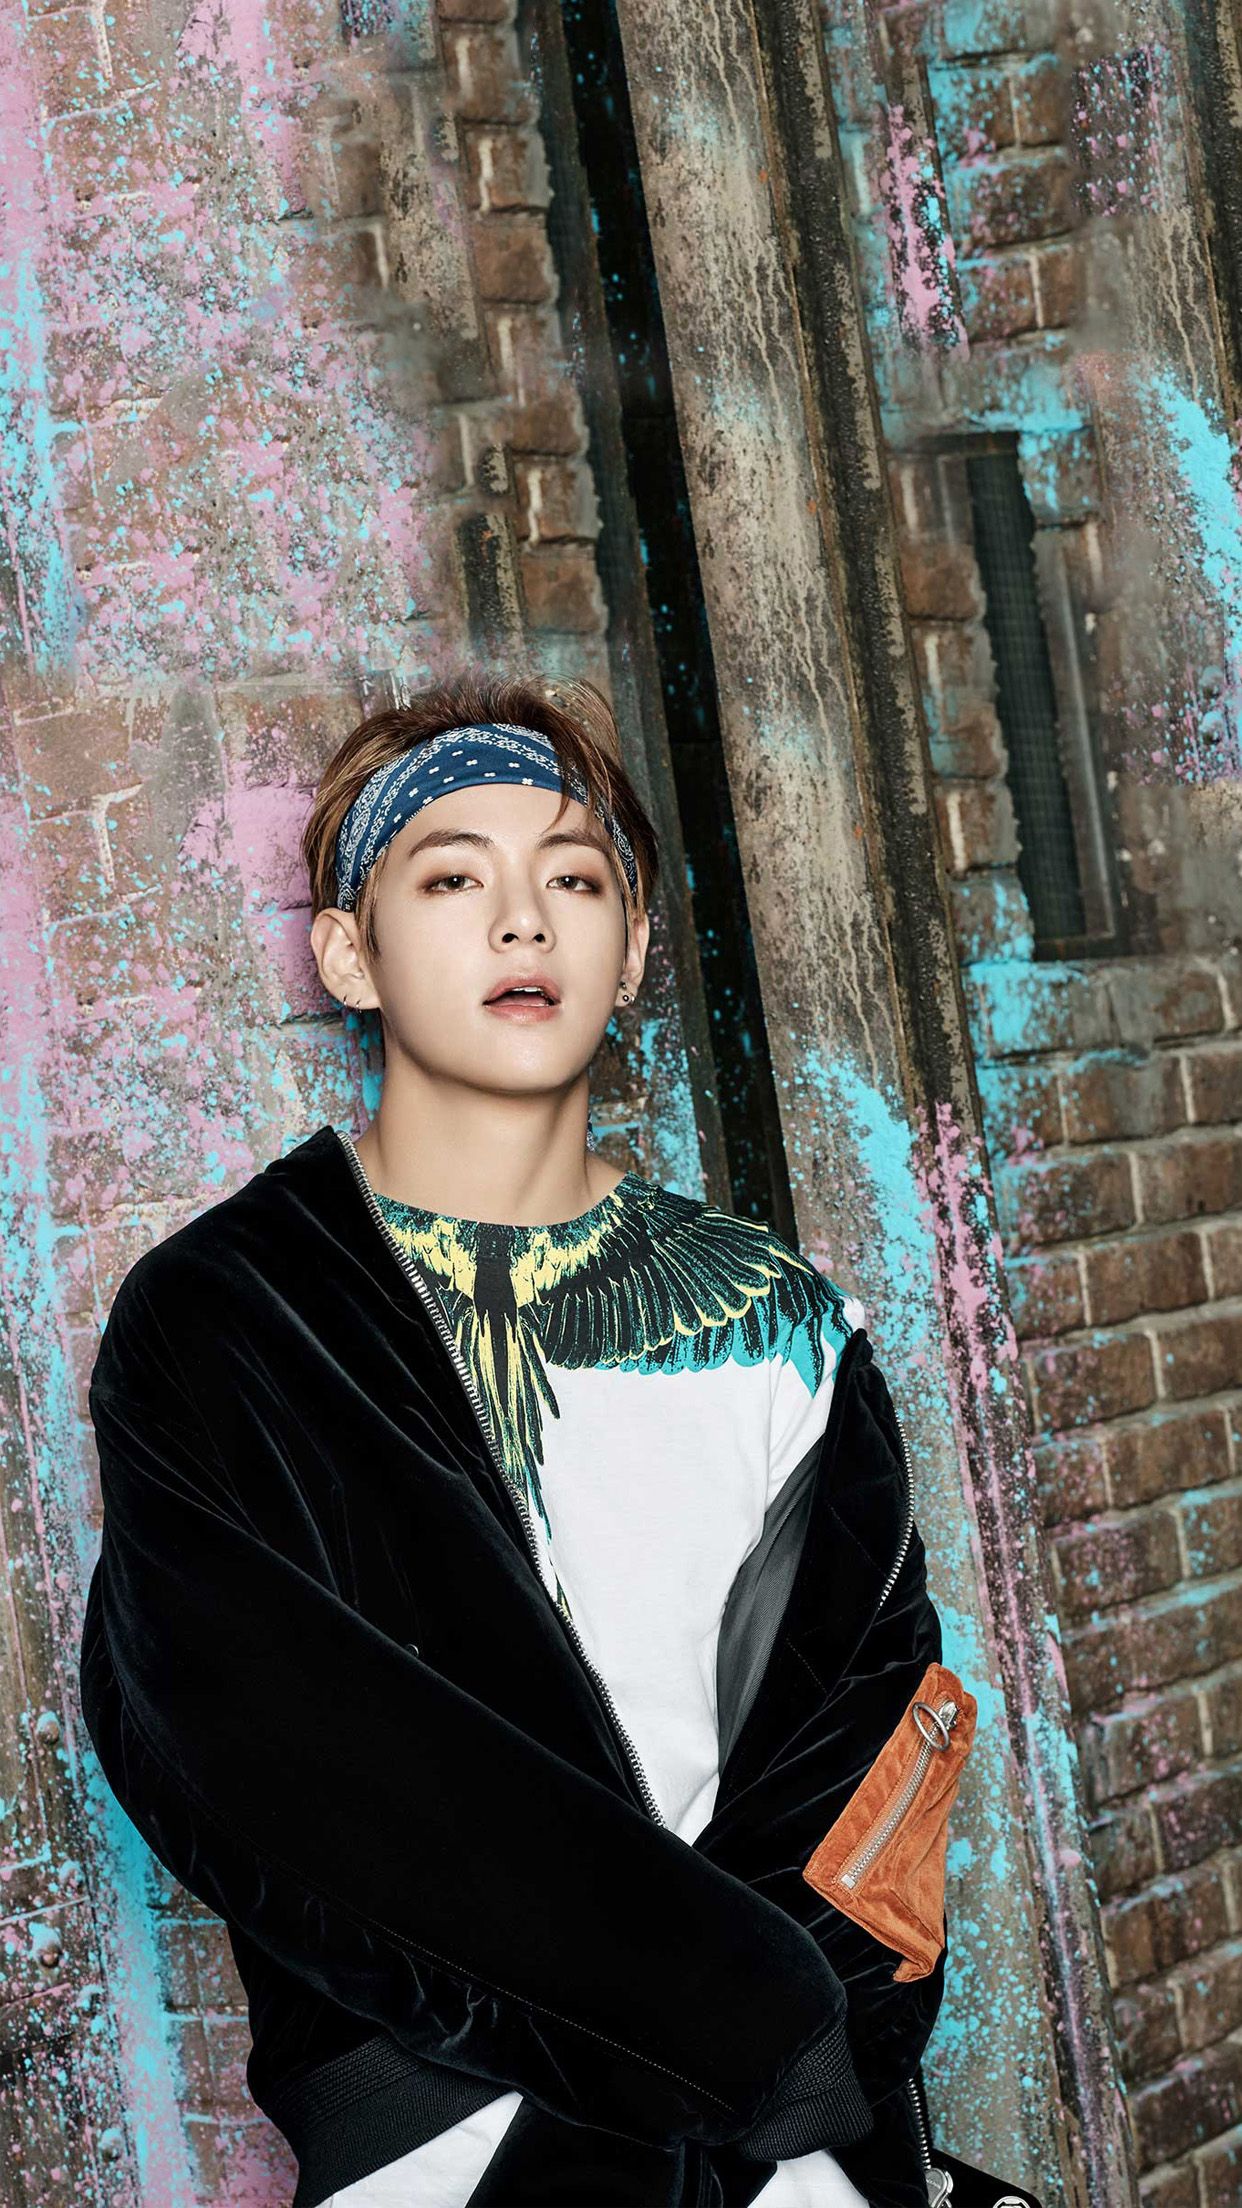 Bts V Phone Wallpapers